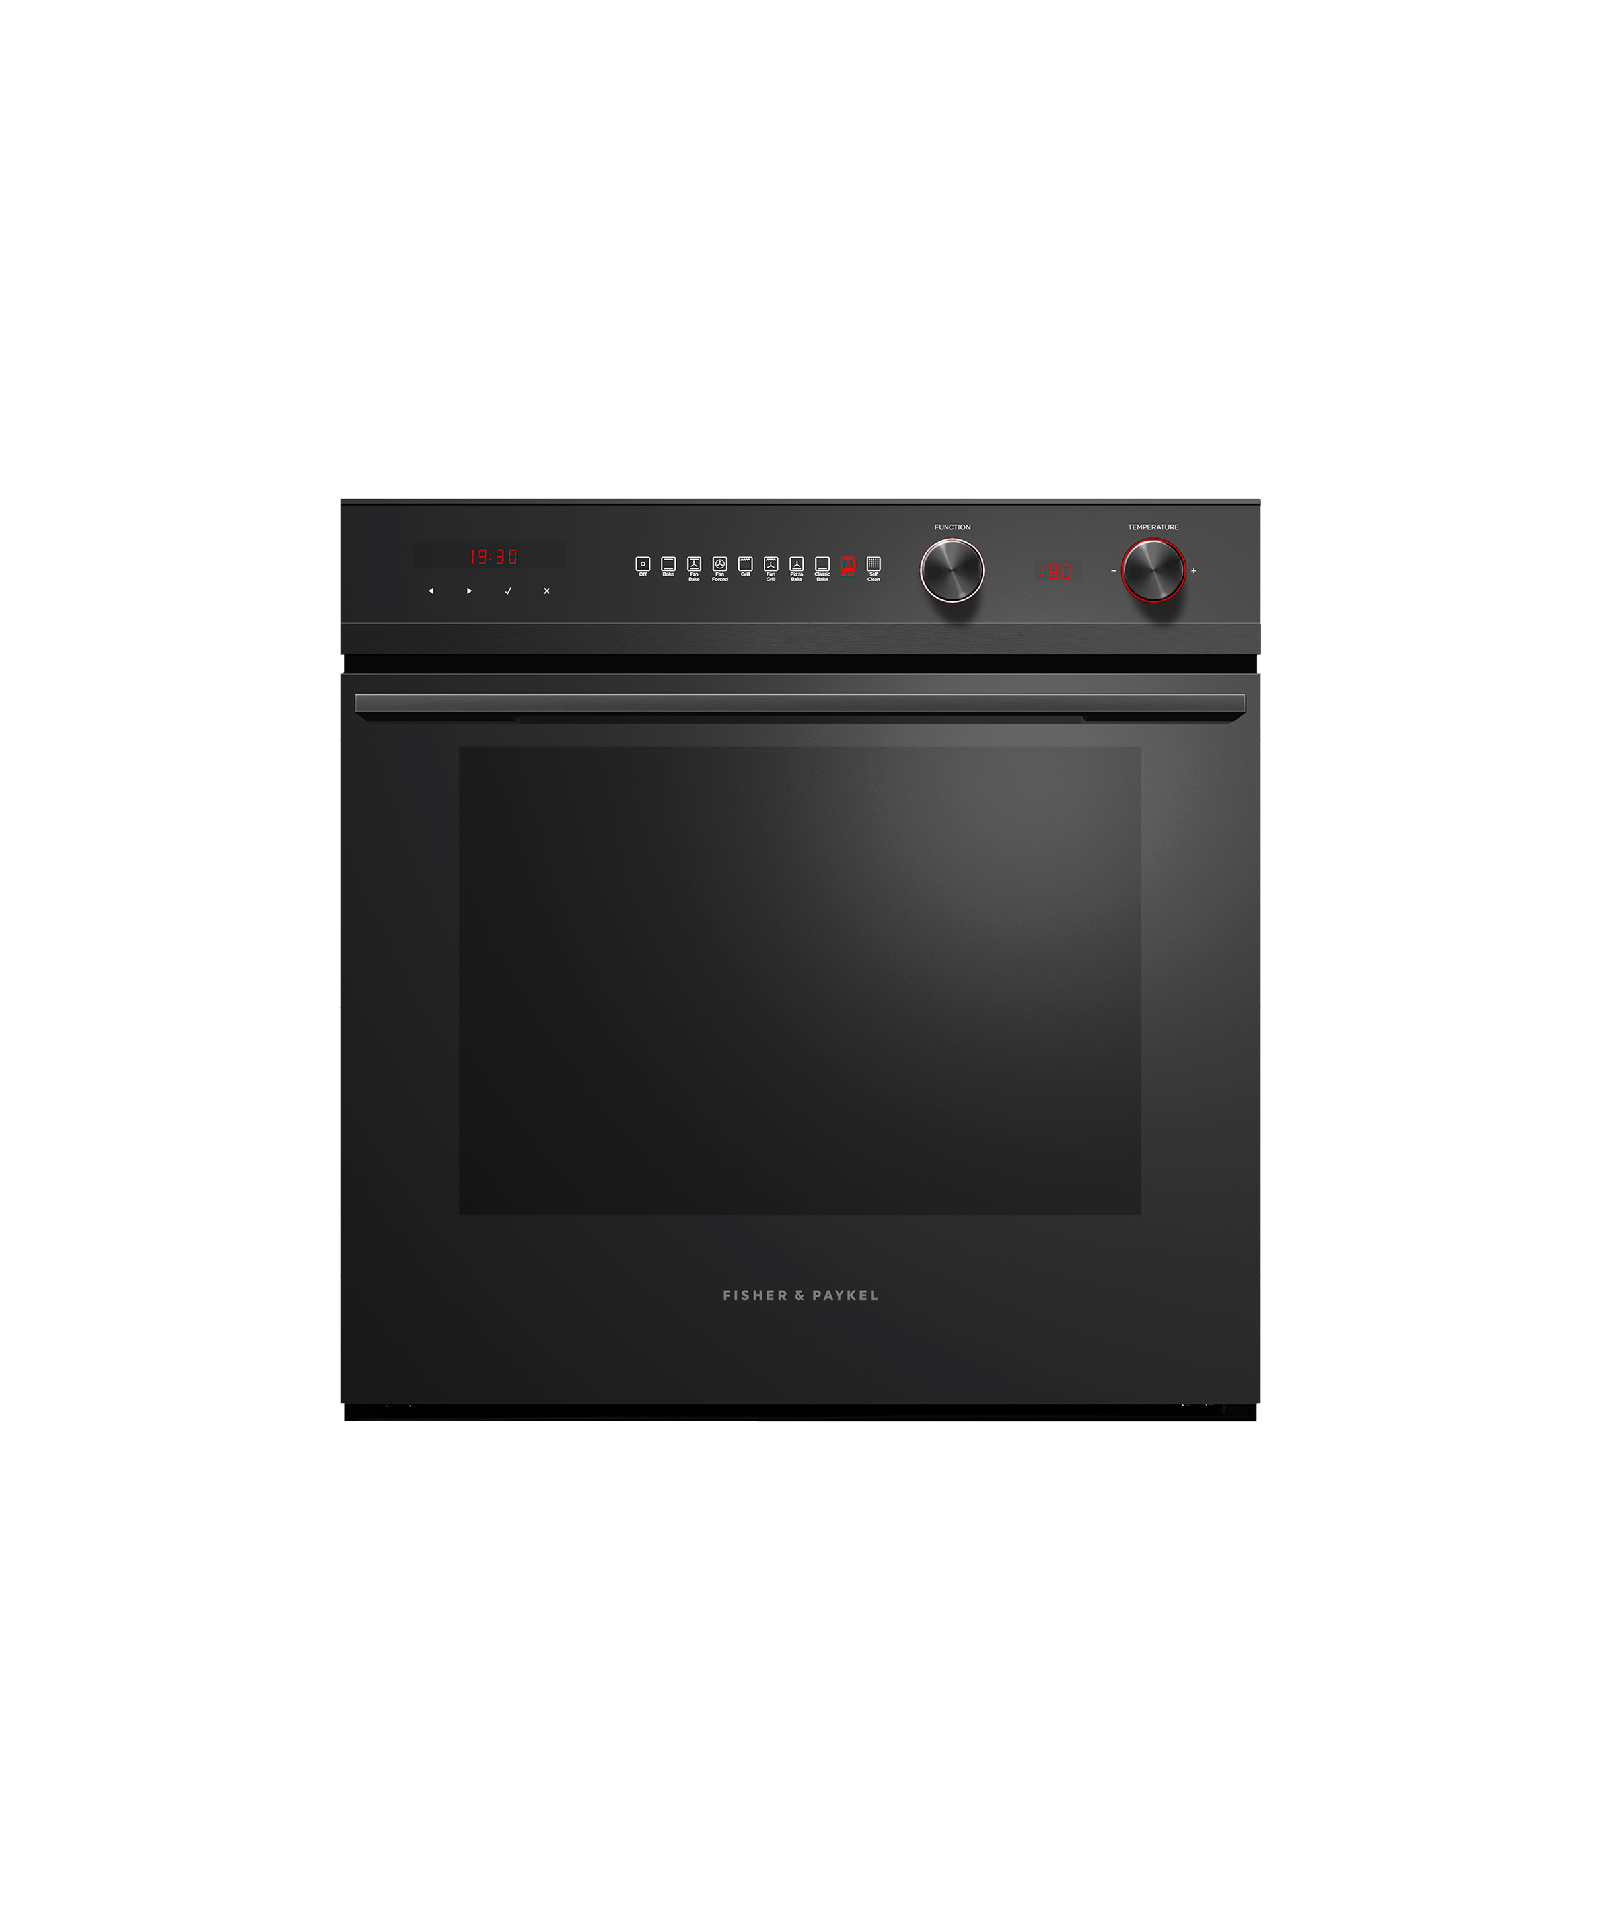 Oven, 60cm, 9 Function, Self-cleaning